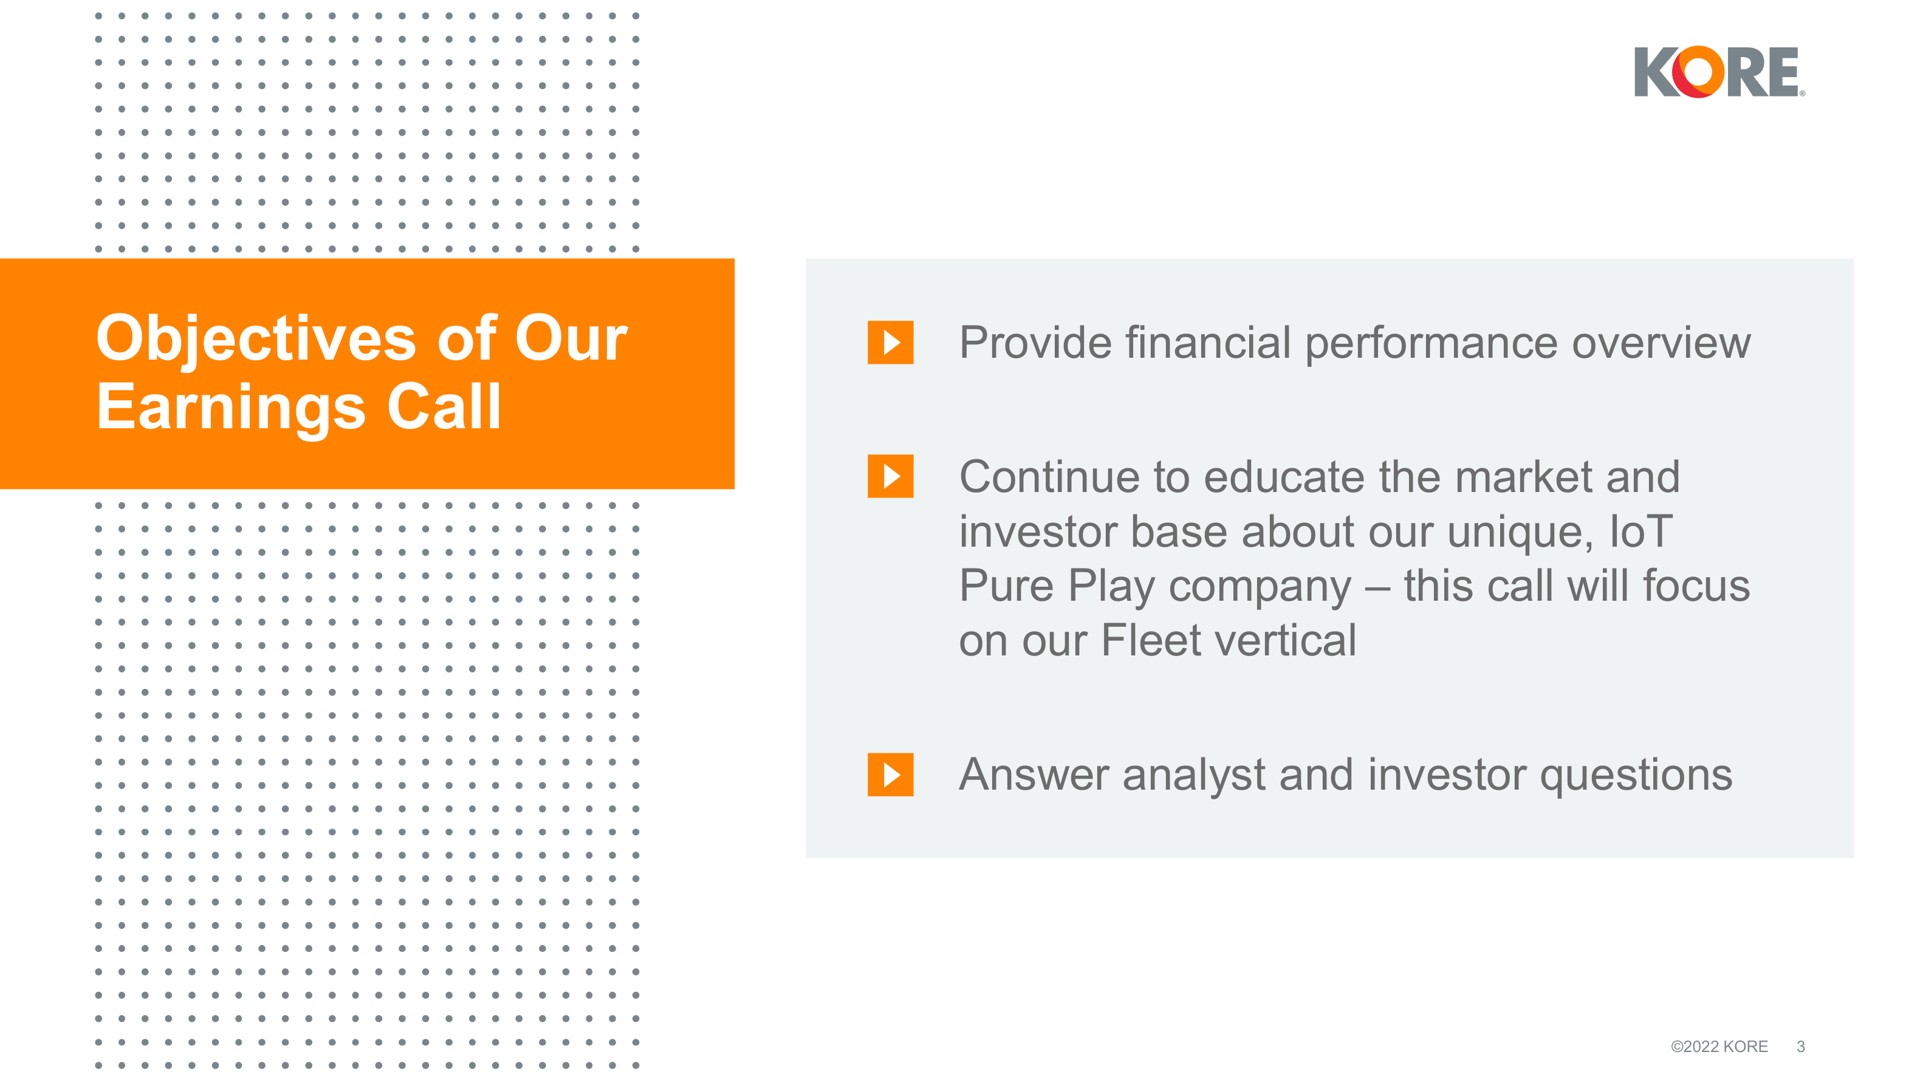 objectives of our earnings call kore ume ams provide financial performance overview continue to educate the market and investor base about unique lot pure play company this will focus on fleet vertical loses answer analyst and investor questions | Kore